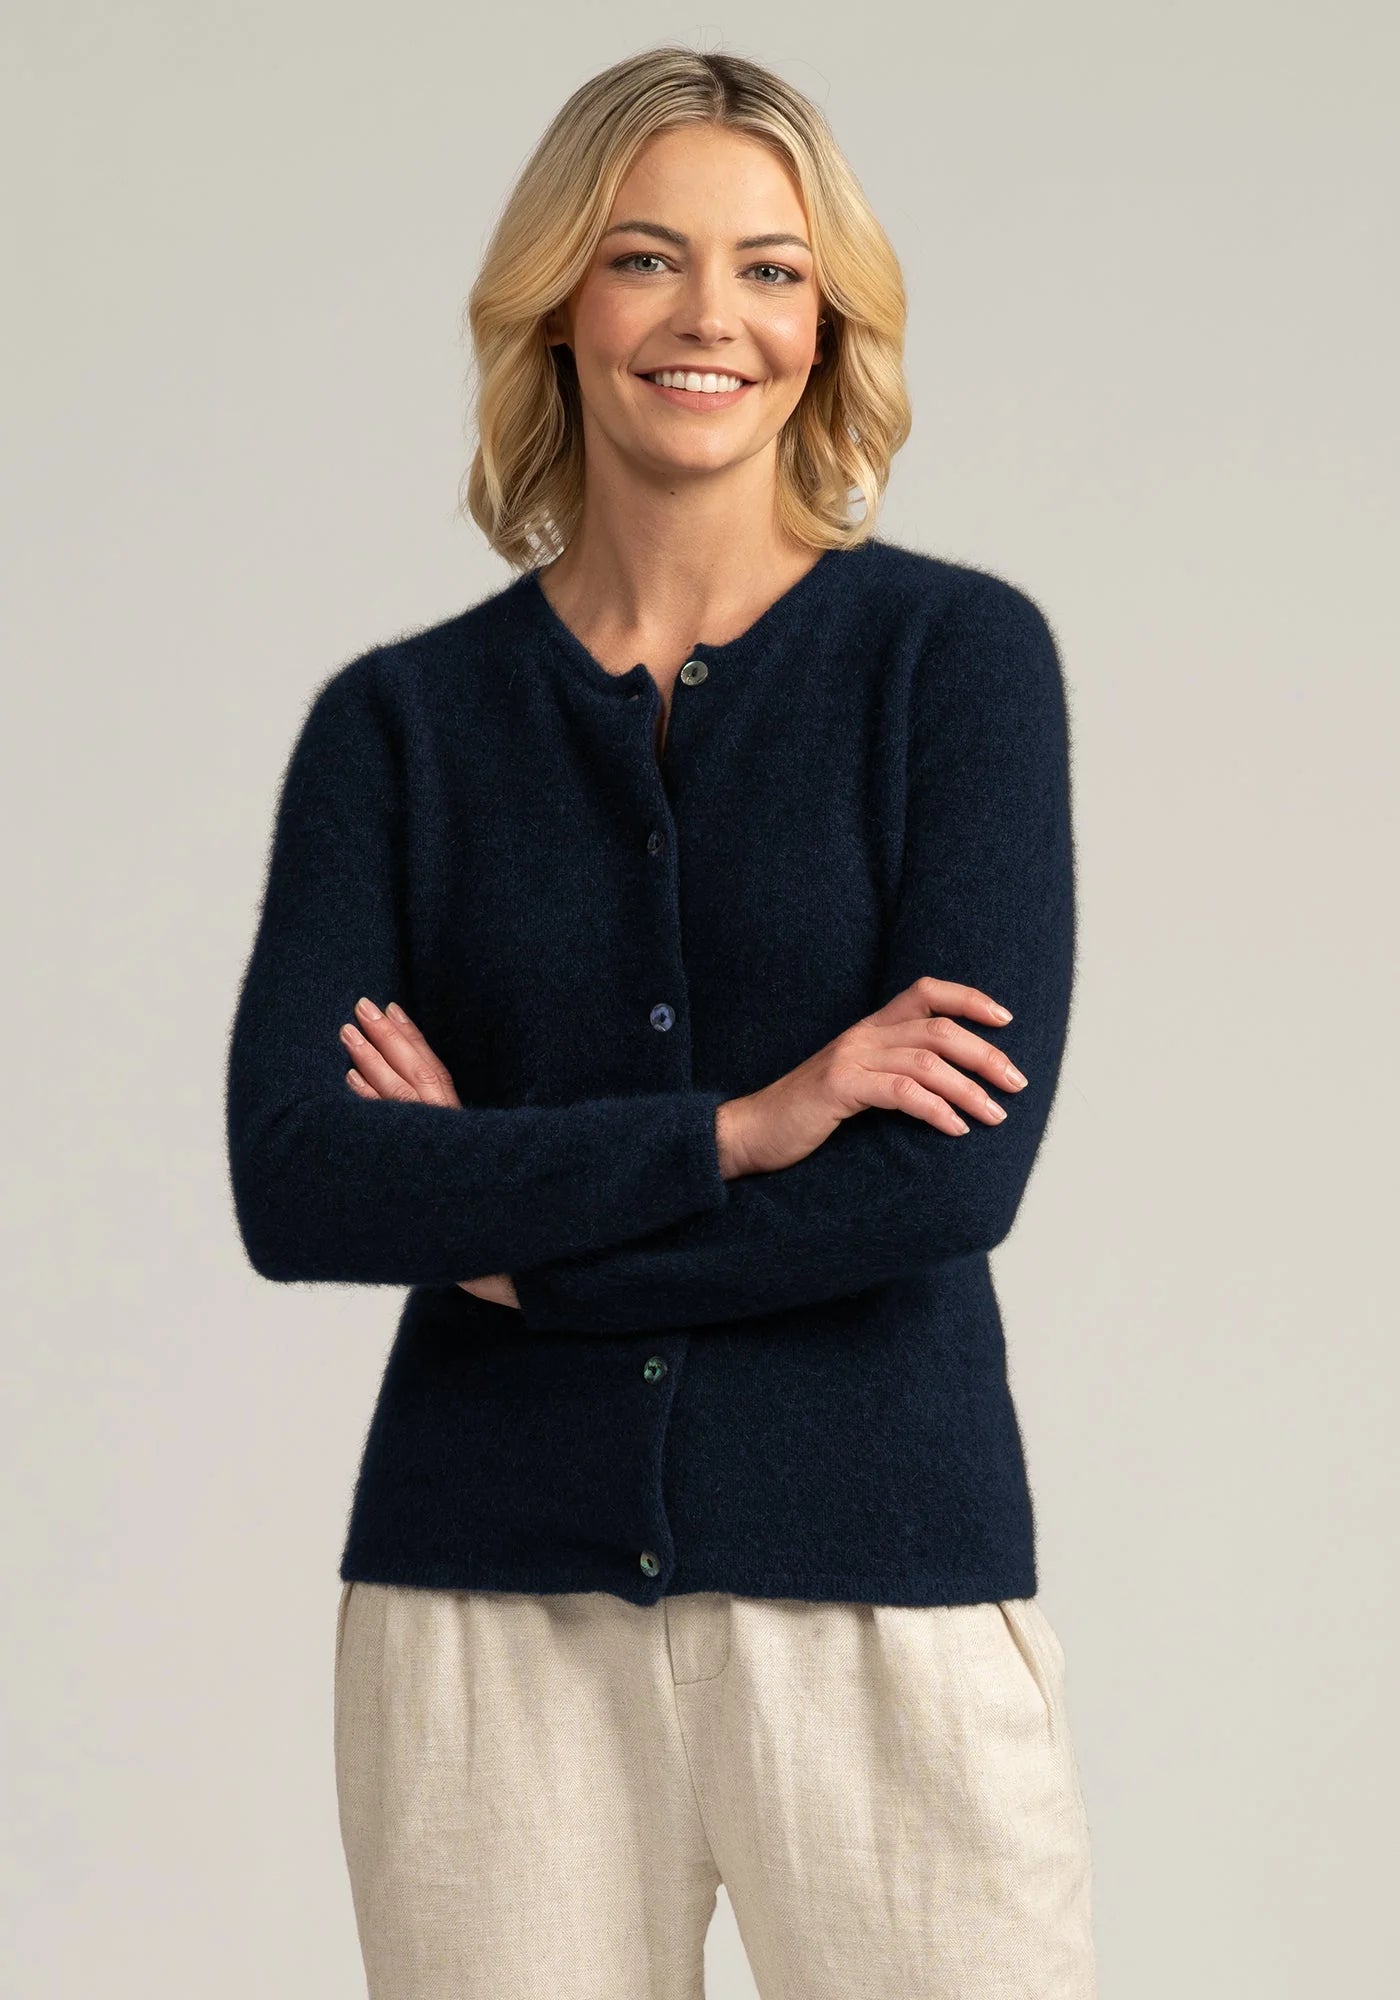 Discover the perfect blend of elegance and warmth with our navy blue merino wool cardigan. Soft, durable, and stylish. Get yours before it’s gone!